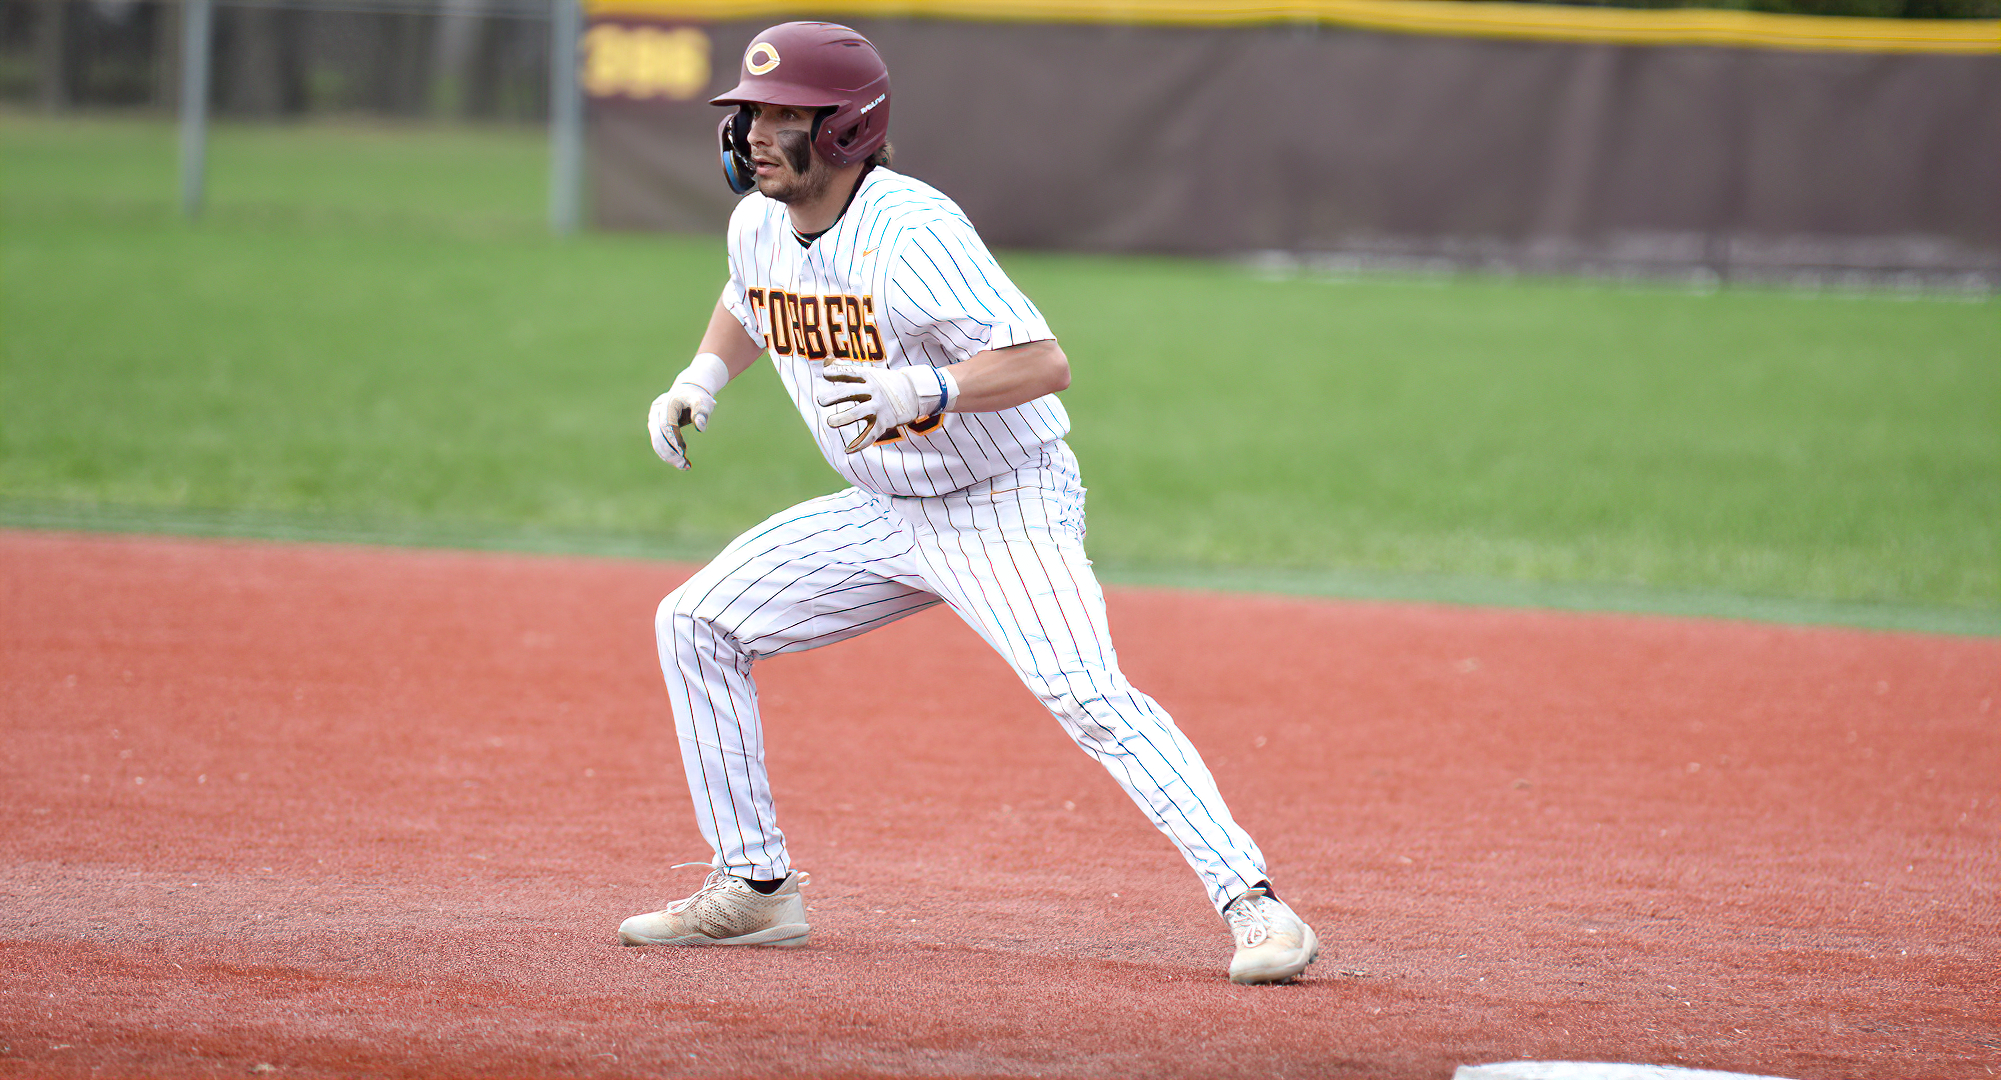 Junior David Dorsey scored two of the Cobbers' three runs against Immaculata. He leads the team in runs scored this season with 10.